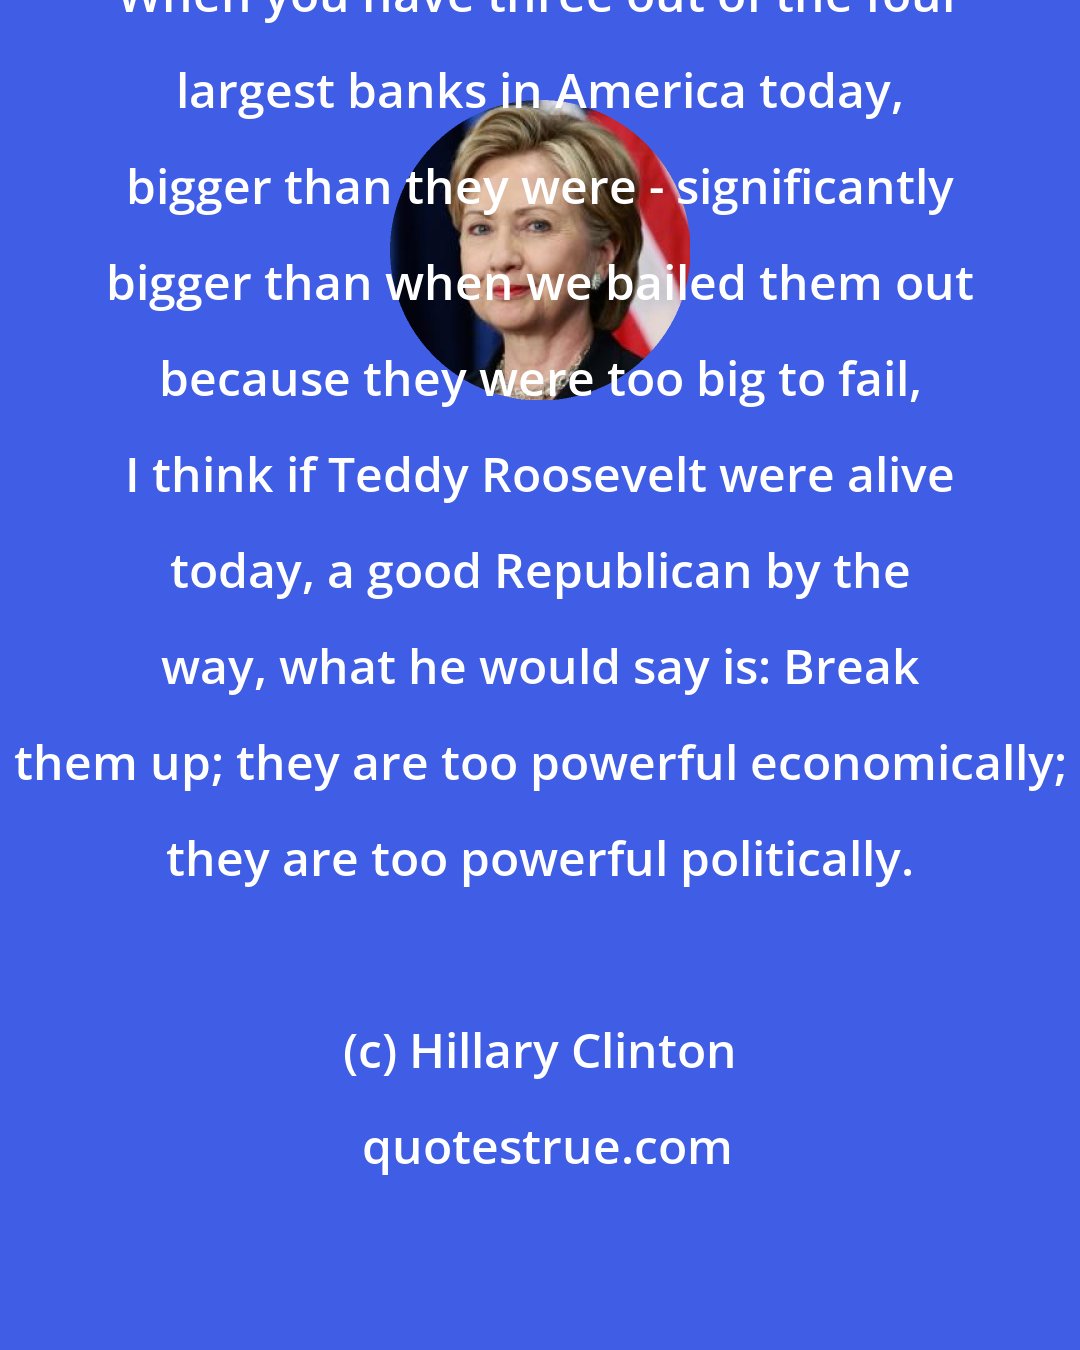 Hillary Clinton: When you have three out of the four largest banks in America today, bigger than they were - significantly bigger than when we bailed them out because they were too big to fail, I think if Teddy Roosevelt were alive today, a good Republican by the way, what he would say is: Break them up; they are too powerful economically; they are too powerful politically.